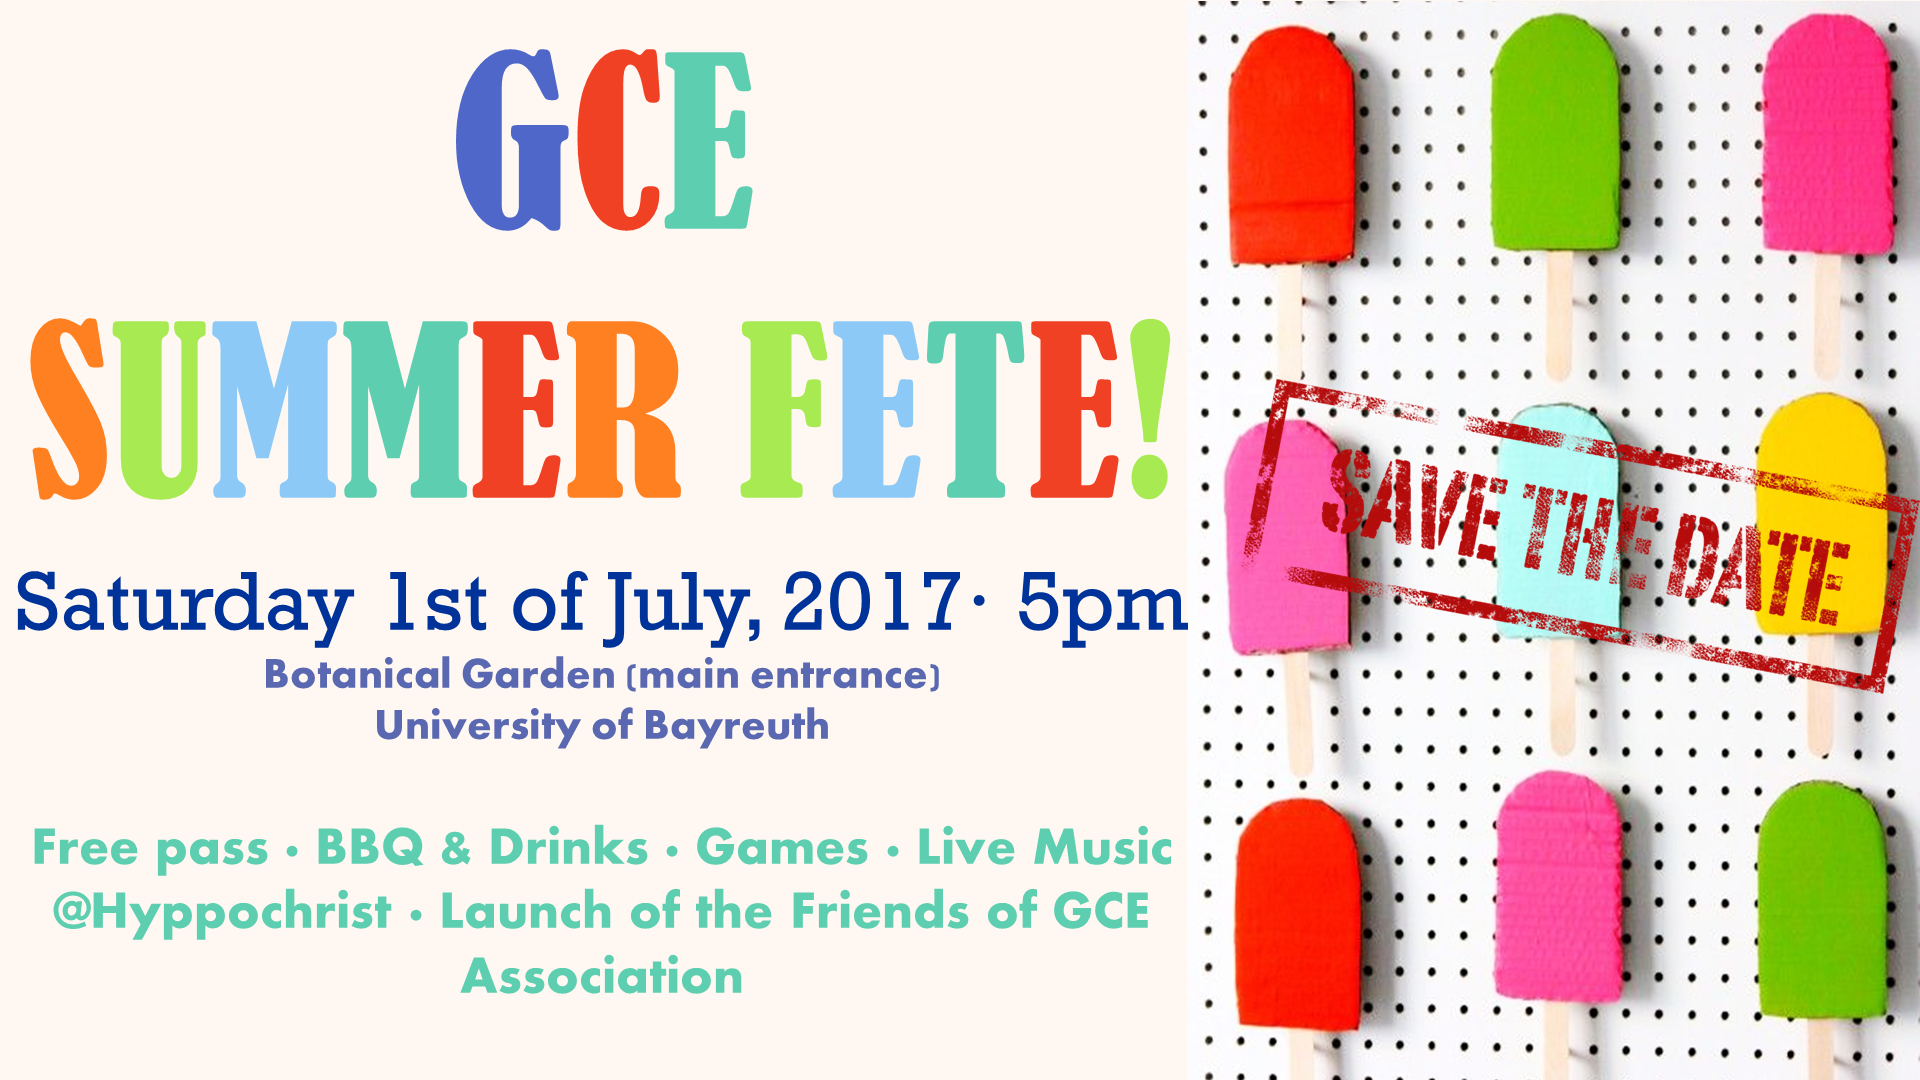 GCE Summer Fête 2017 - Save the Date!